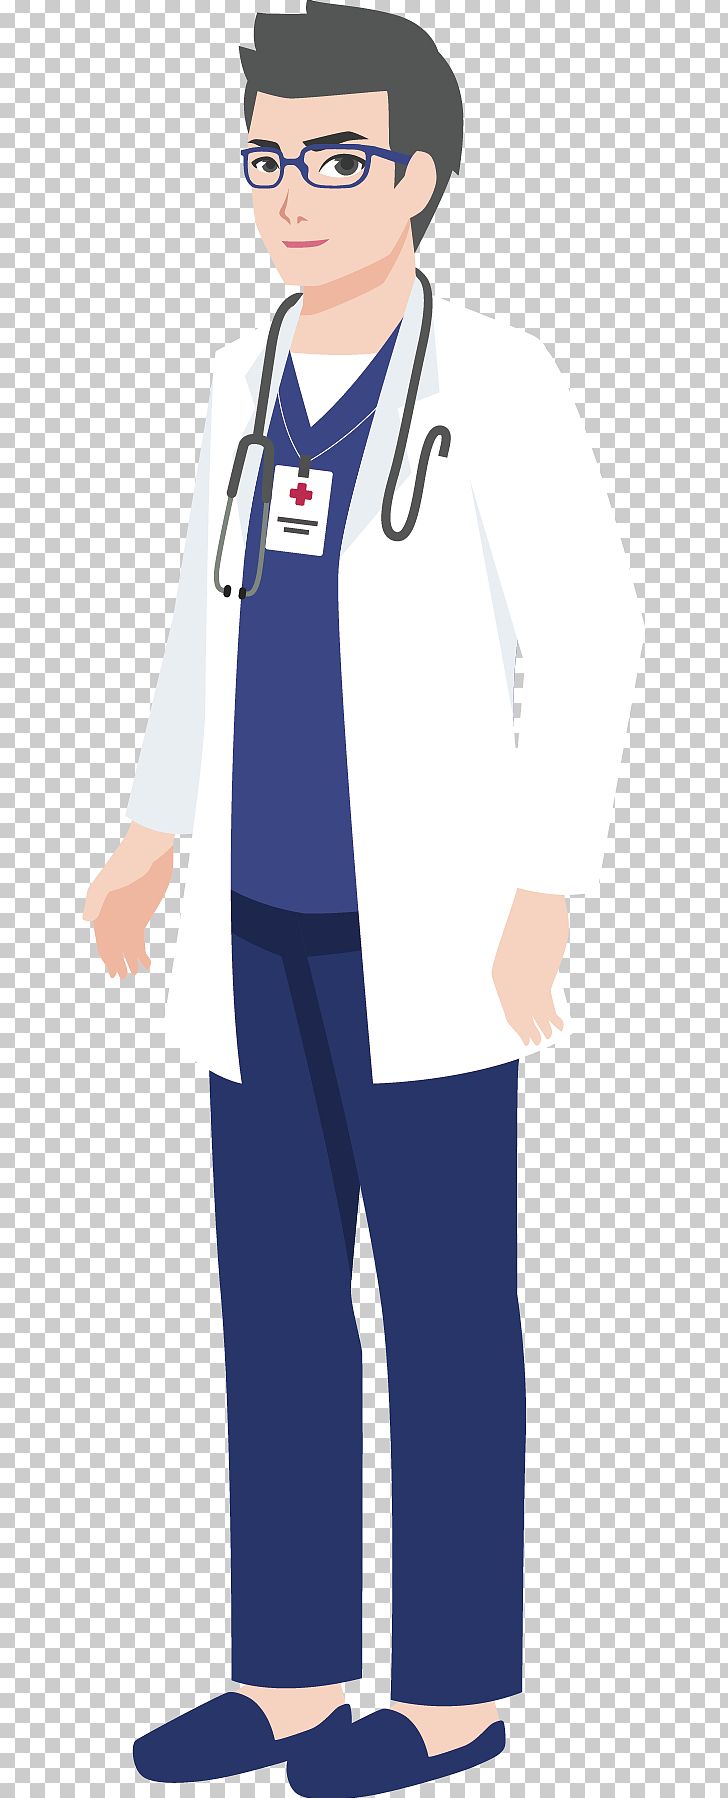 Cartoon Physician Illustration PNG, Clipart, Animal, Anime Doctor, Chinese Doctors, Clip Art, Computer Icons Free PNG Download